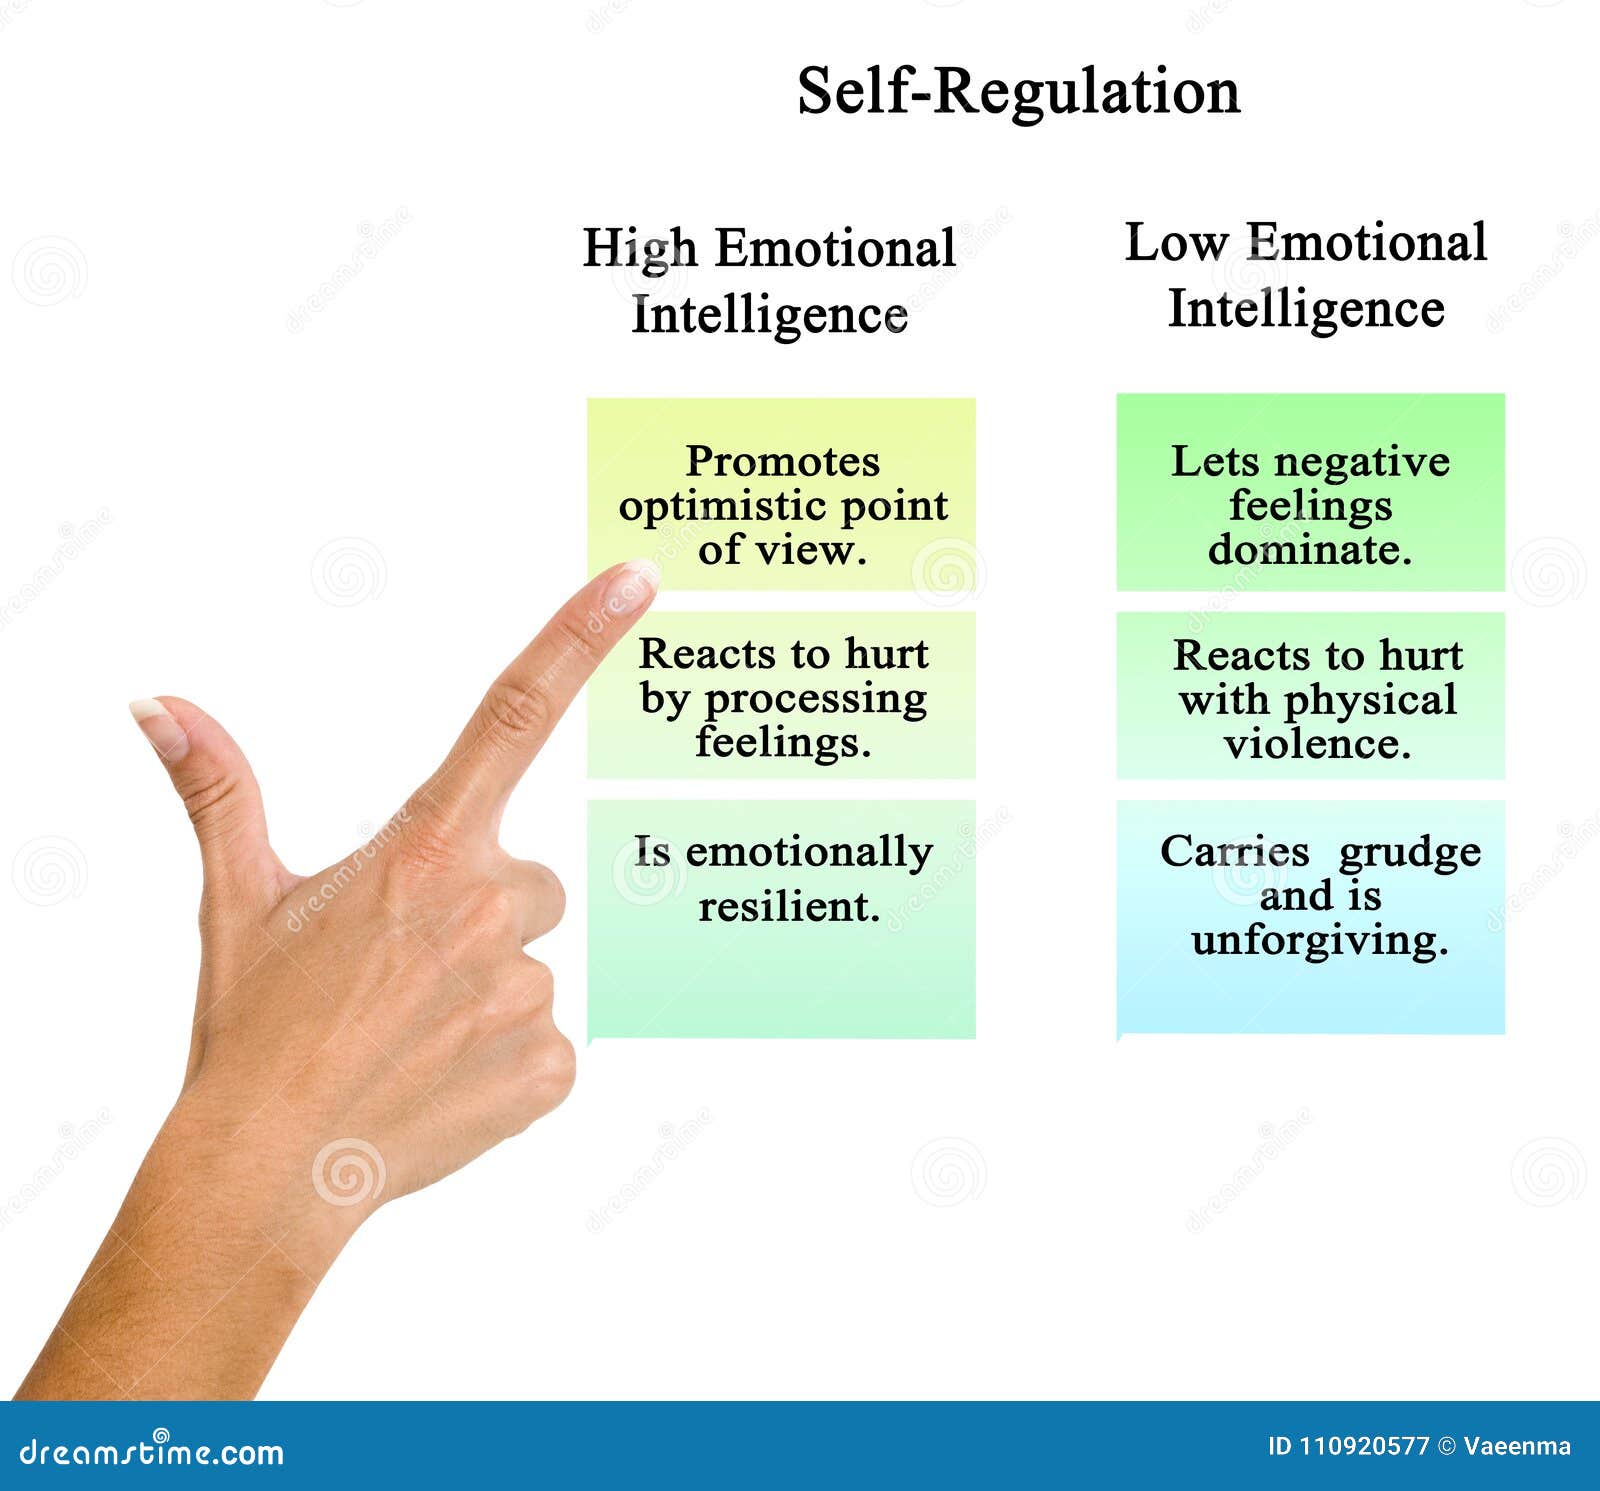 self-regulation of high and low eq